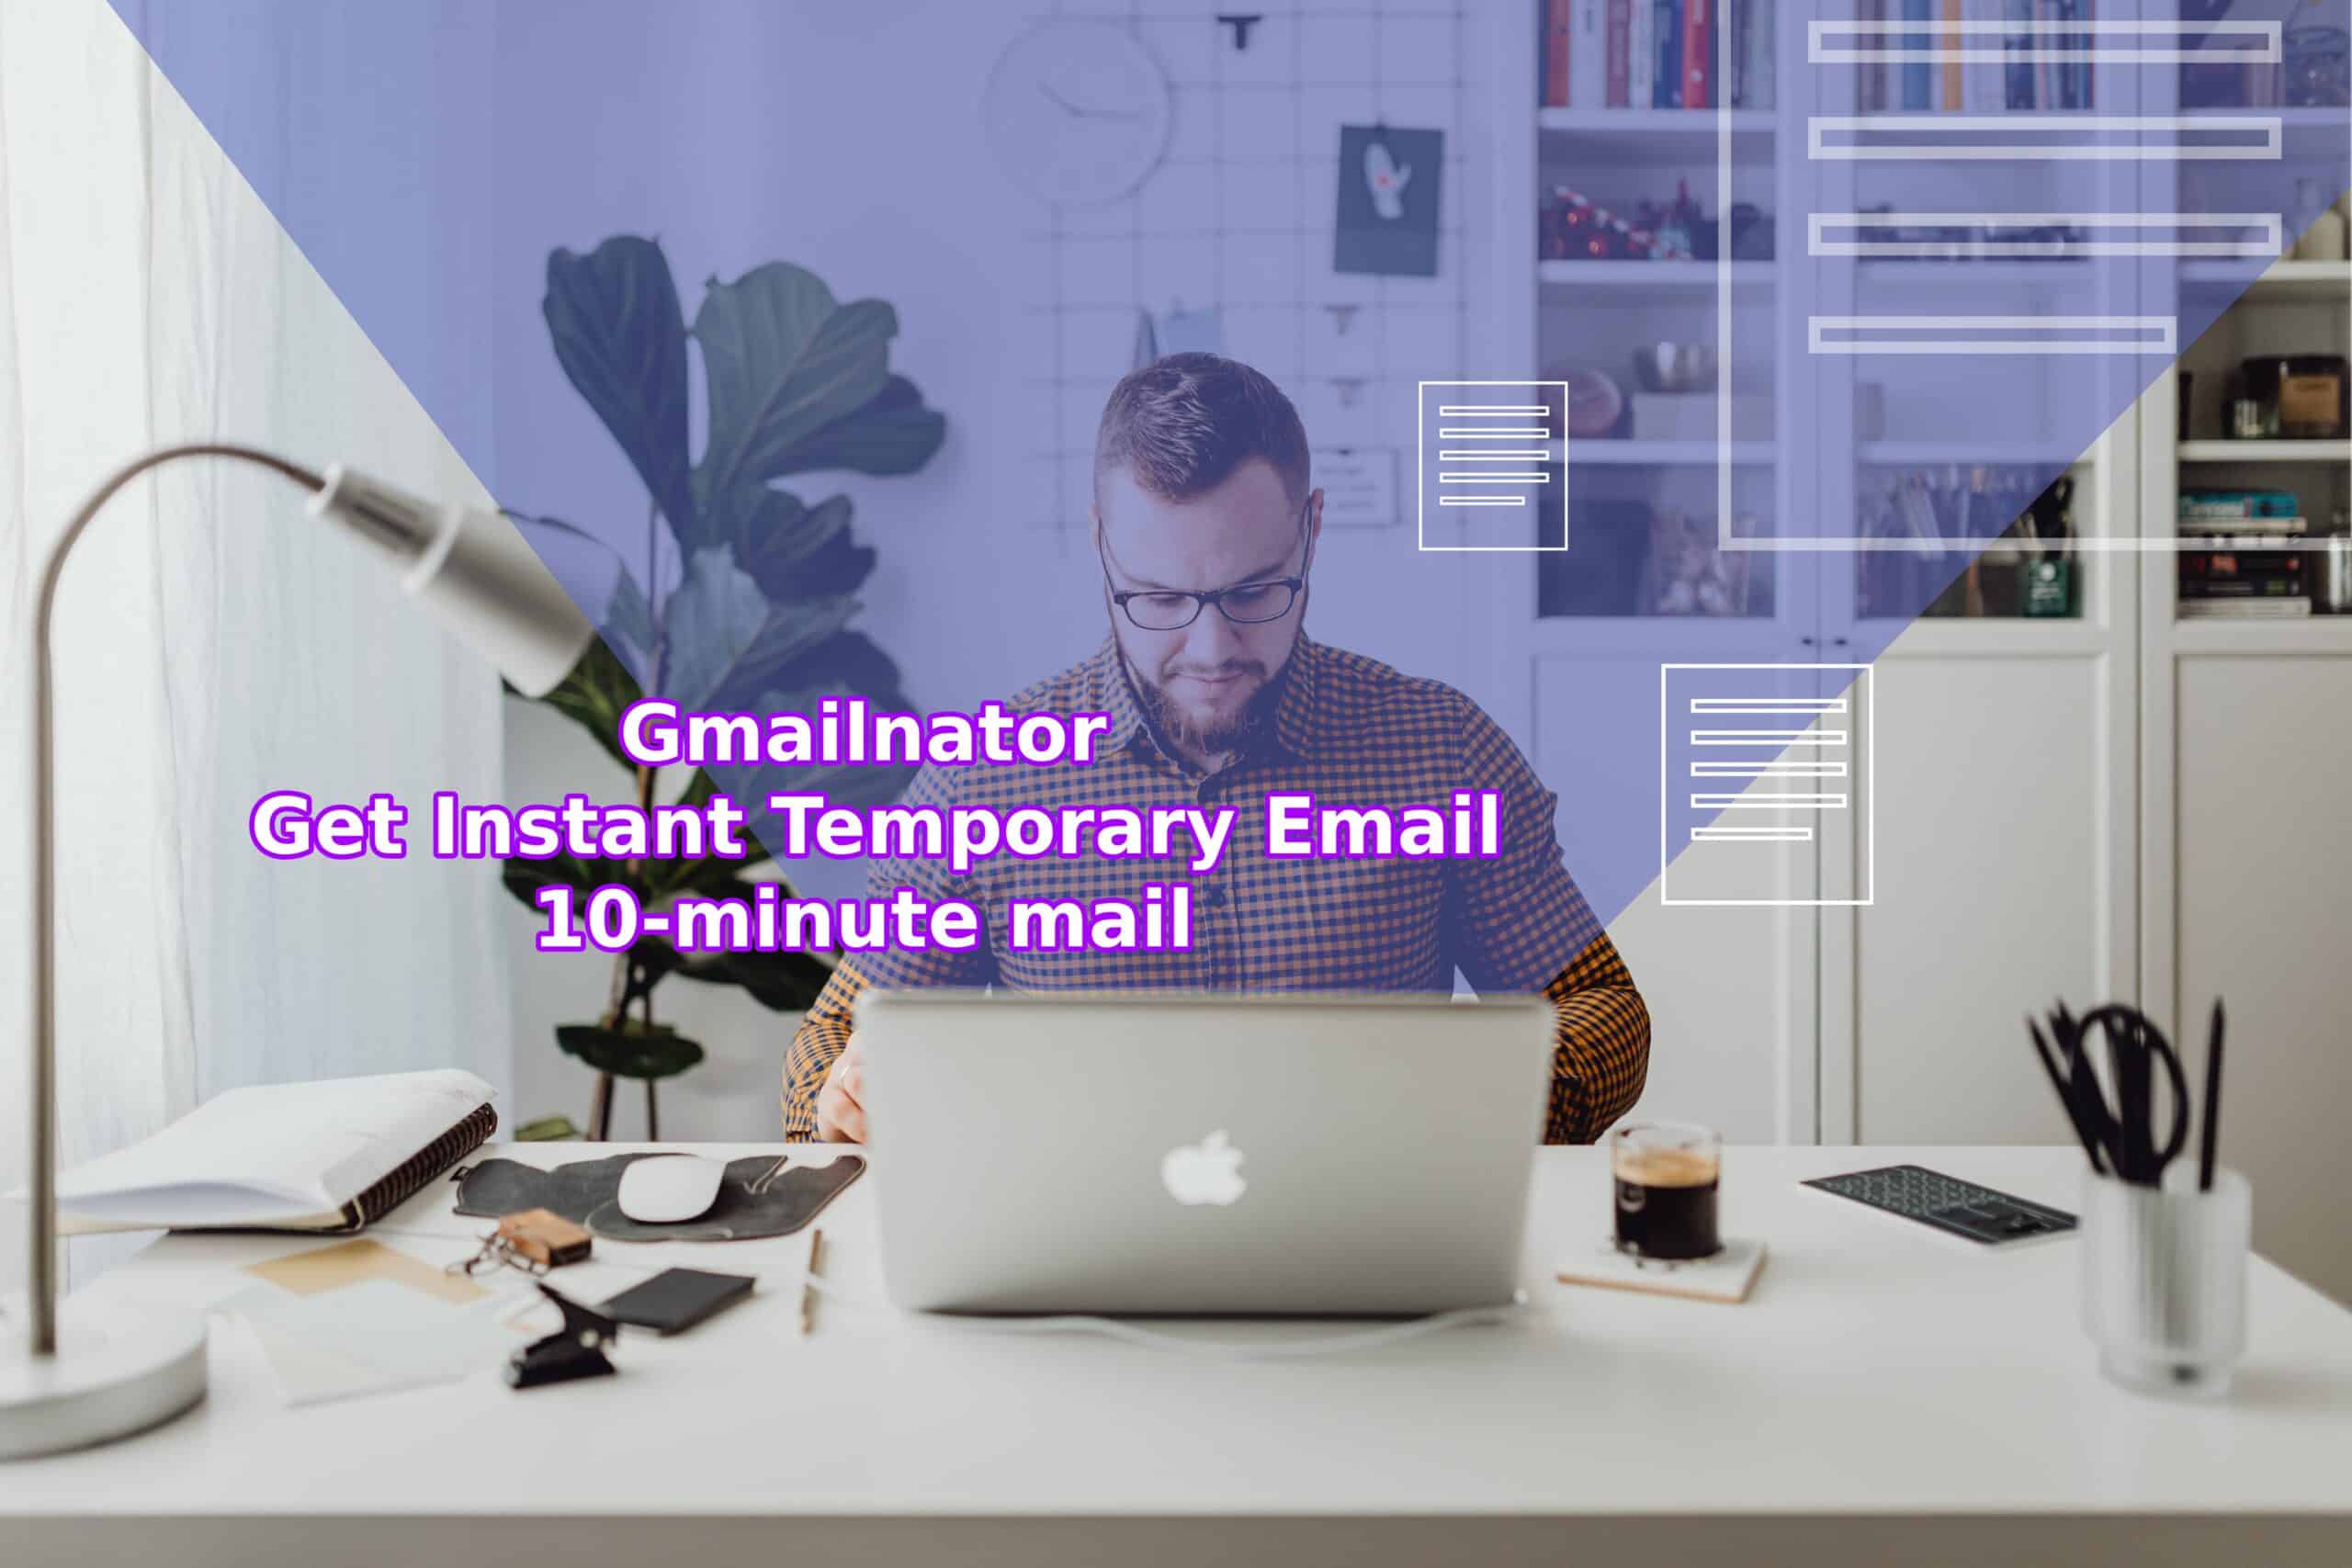 Gmailnator | Get Instant Temporary Email | 10-minute mail